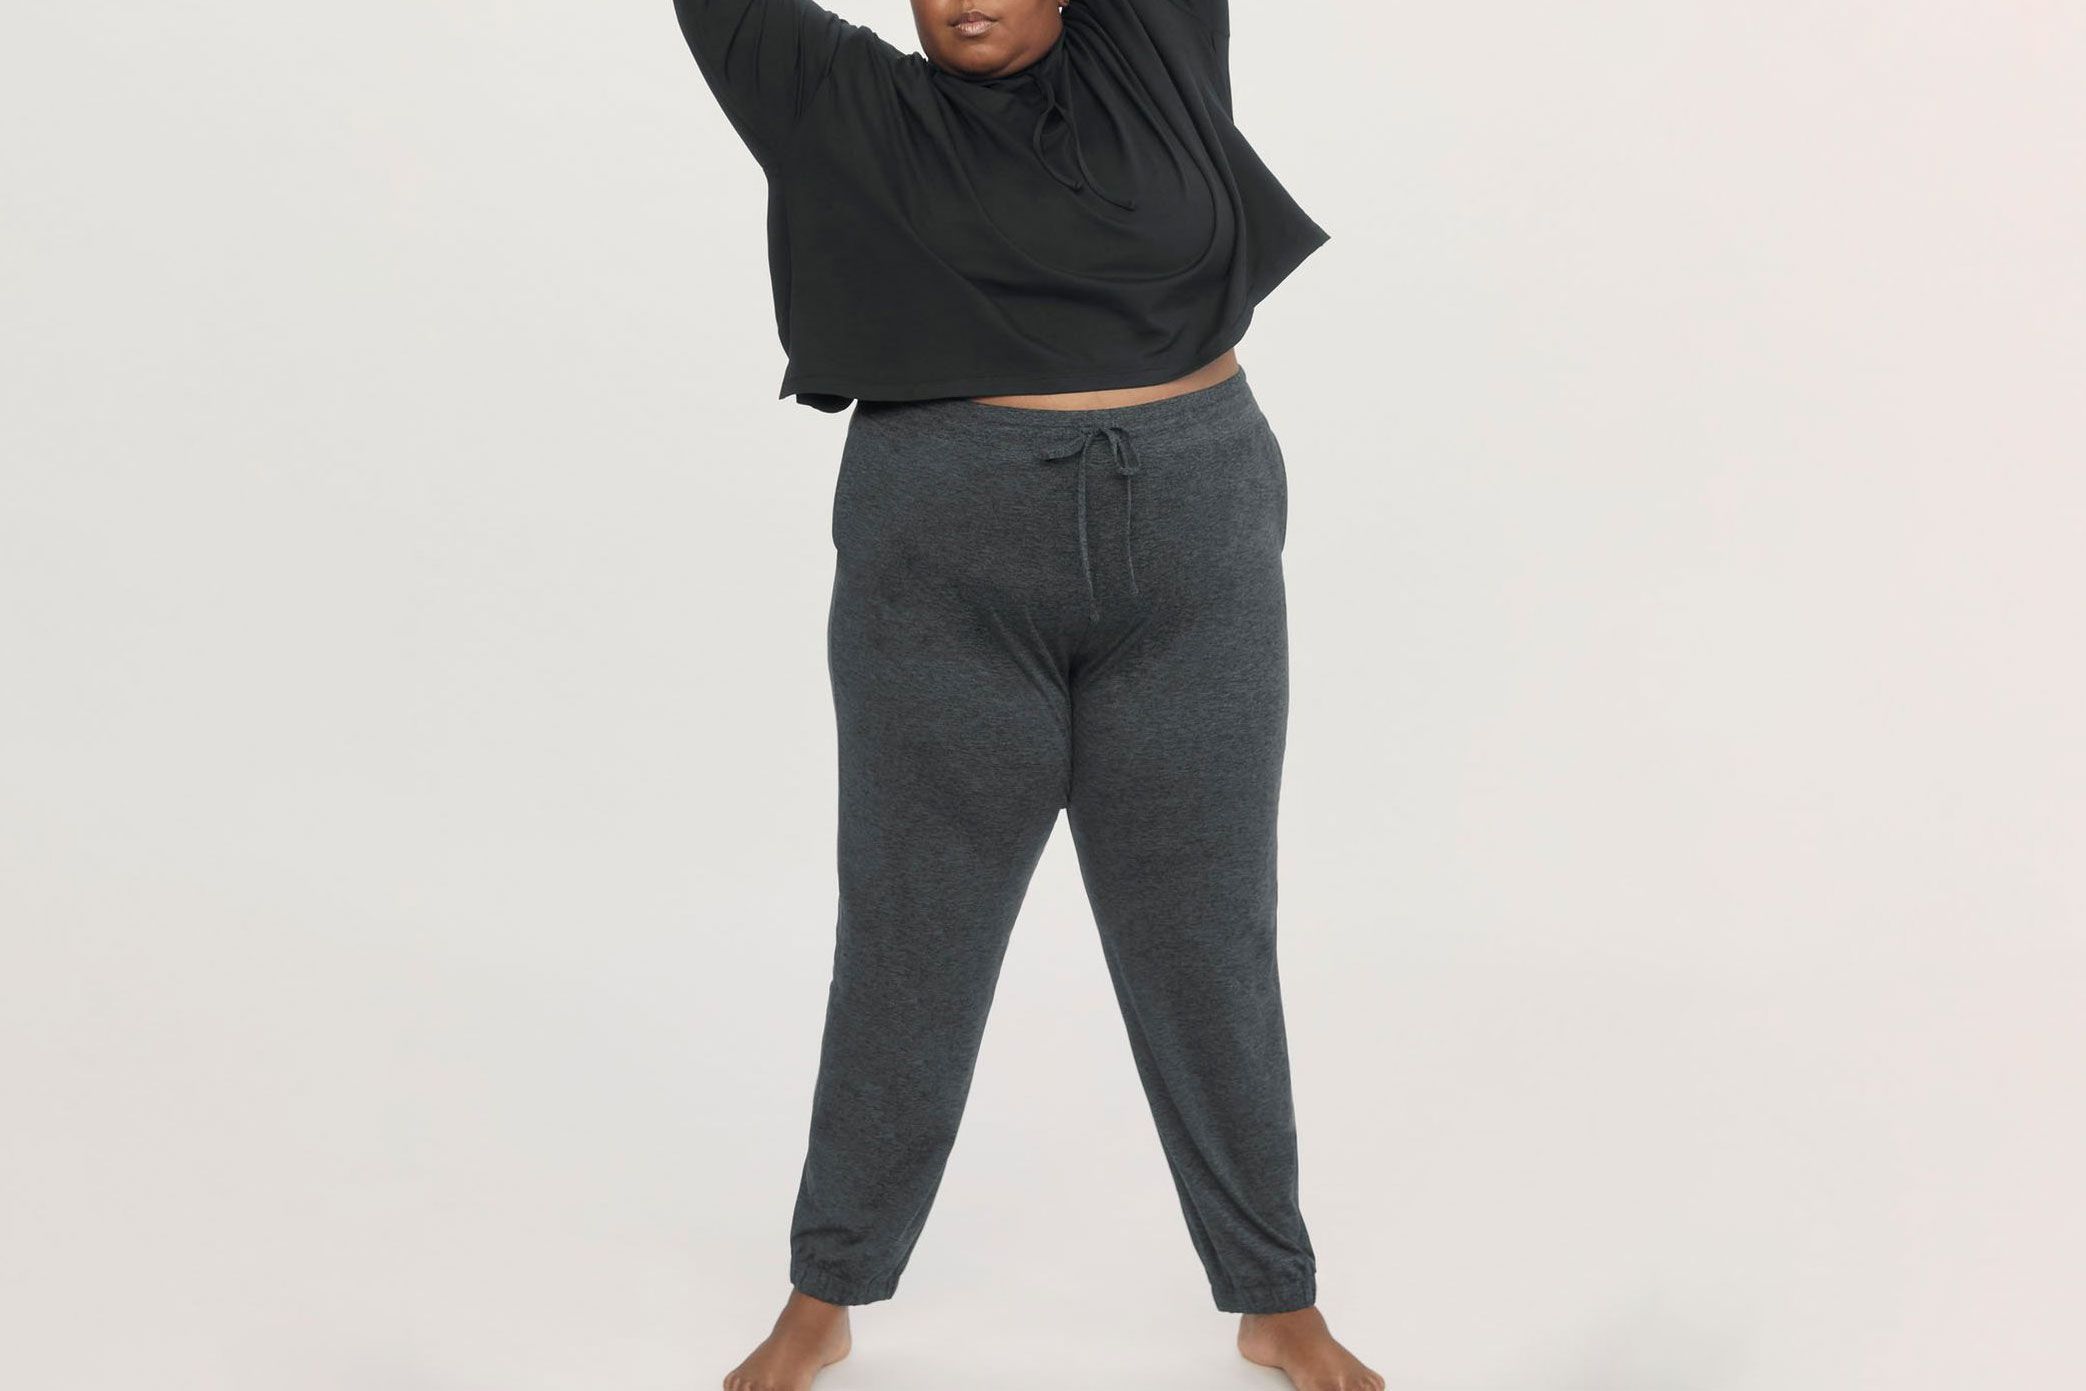 Why Do College Girls Wear Sweatpants All The Time? – solowomen